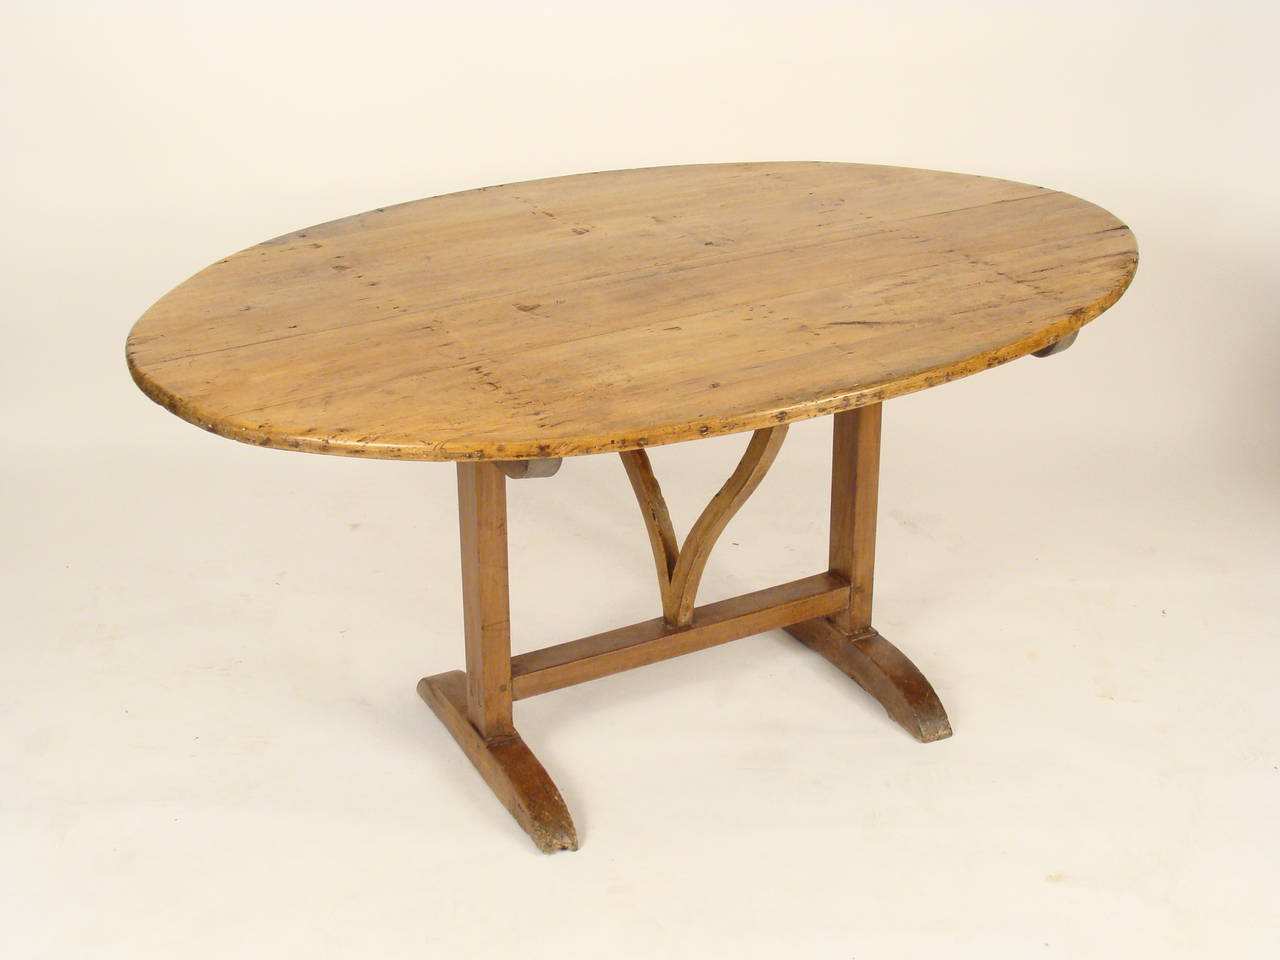 Antique French beechwood wine table, 19th century.